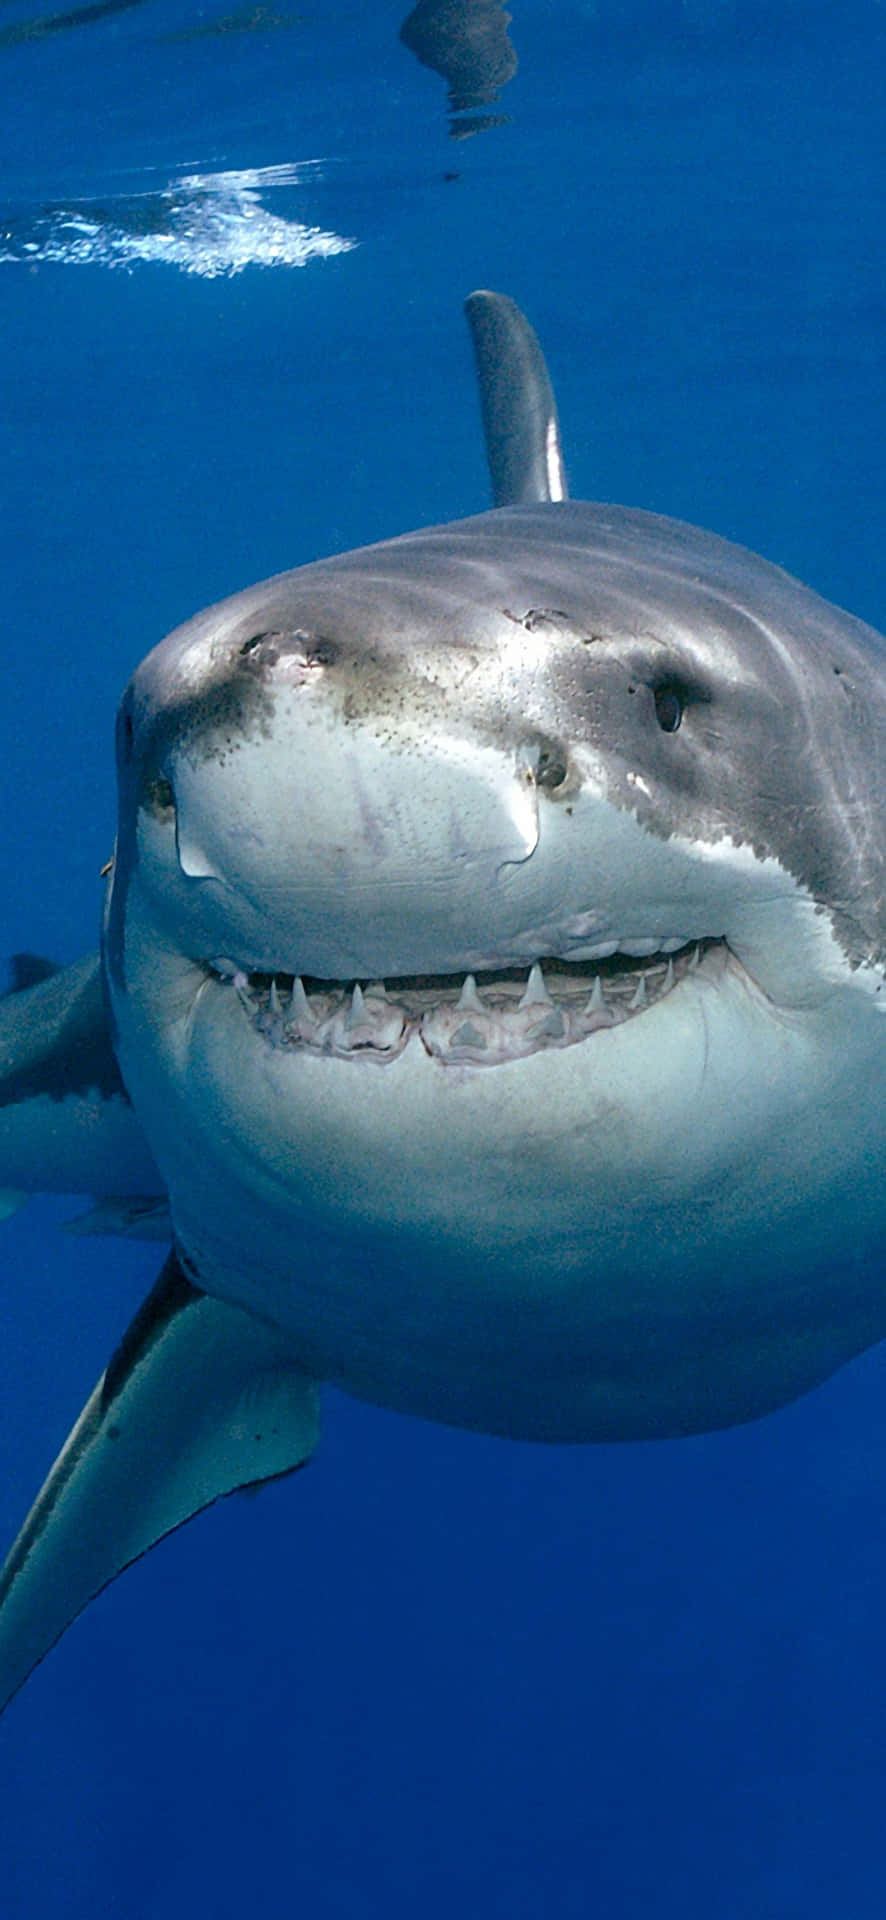 A Great White Shark Is Swimming In The Ocean